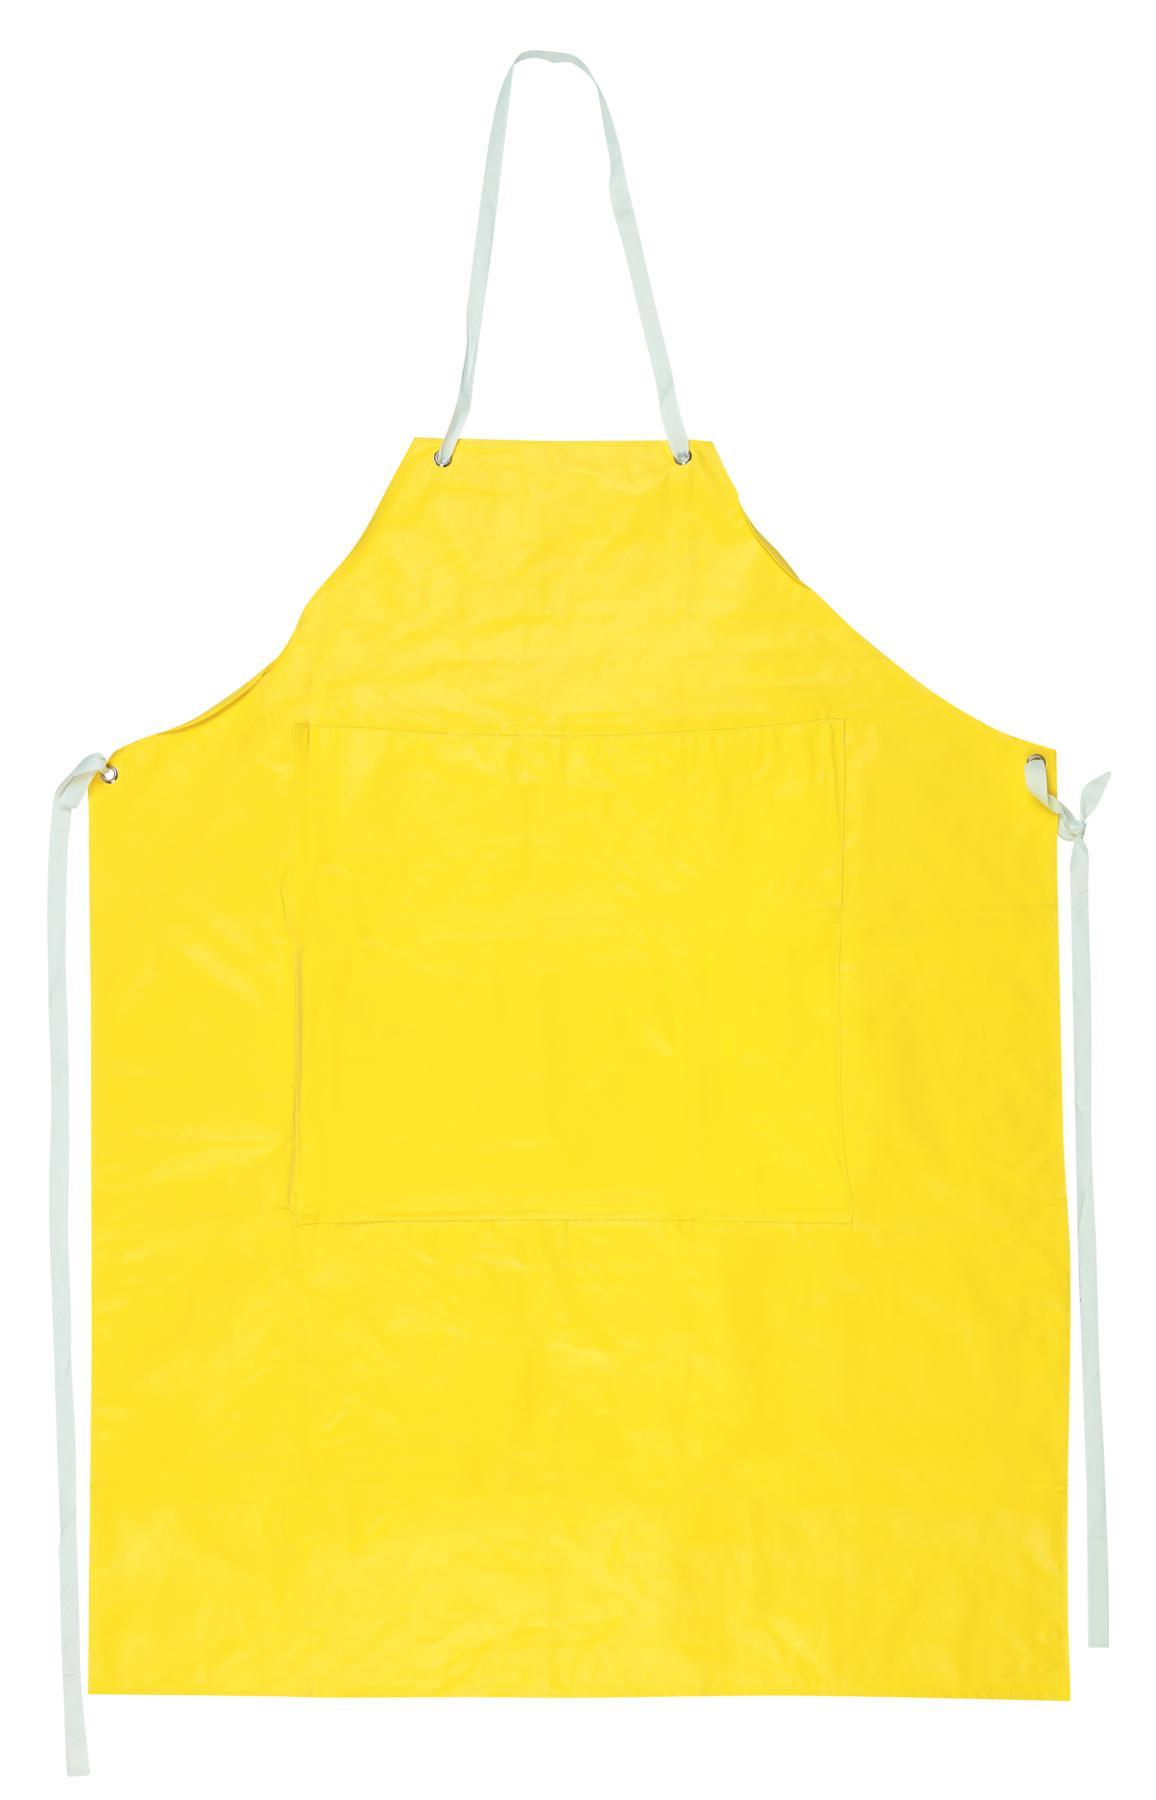 KleenGuard™ 44481 A40 Protective Apron, Microporous Film Laminate, 40 in L x 28 in W, Tie Closure